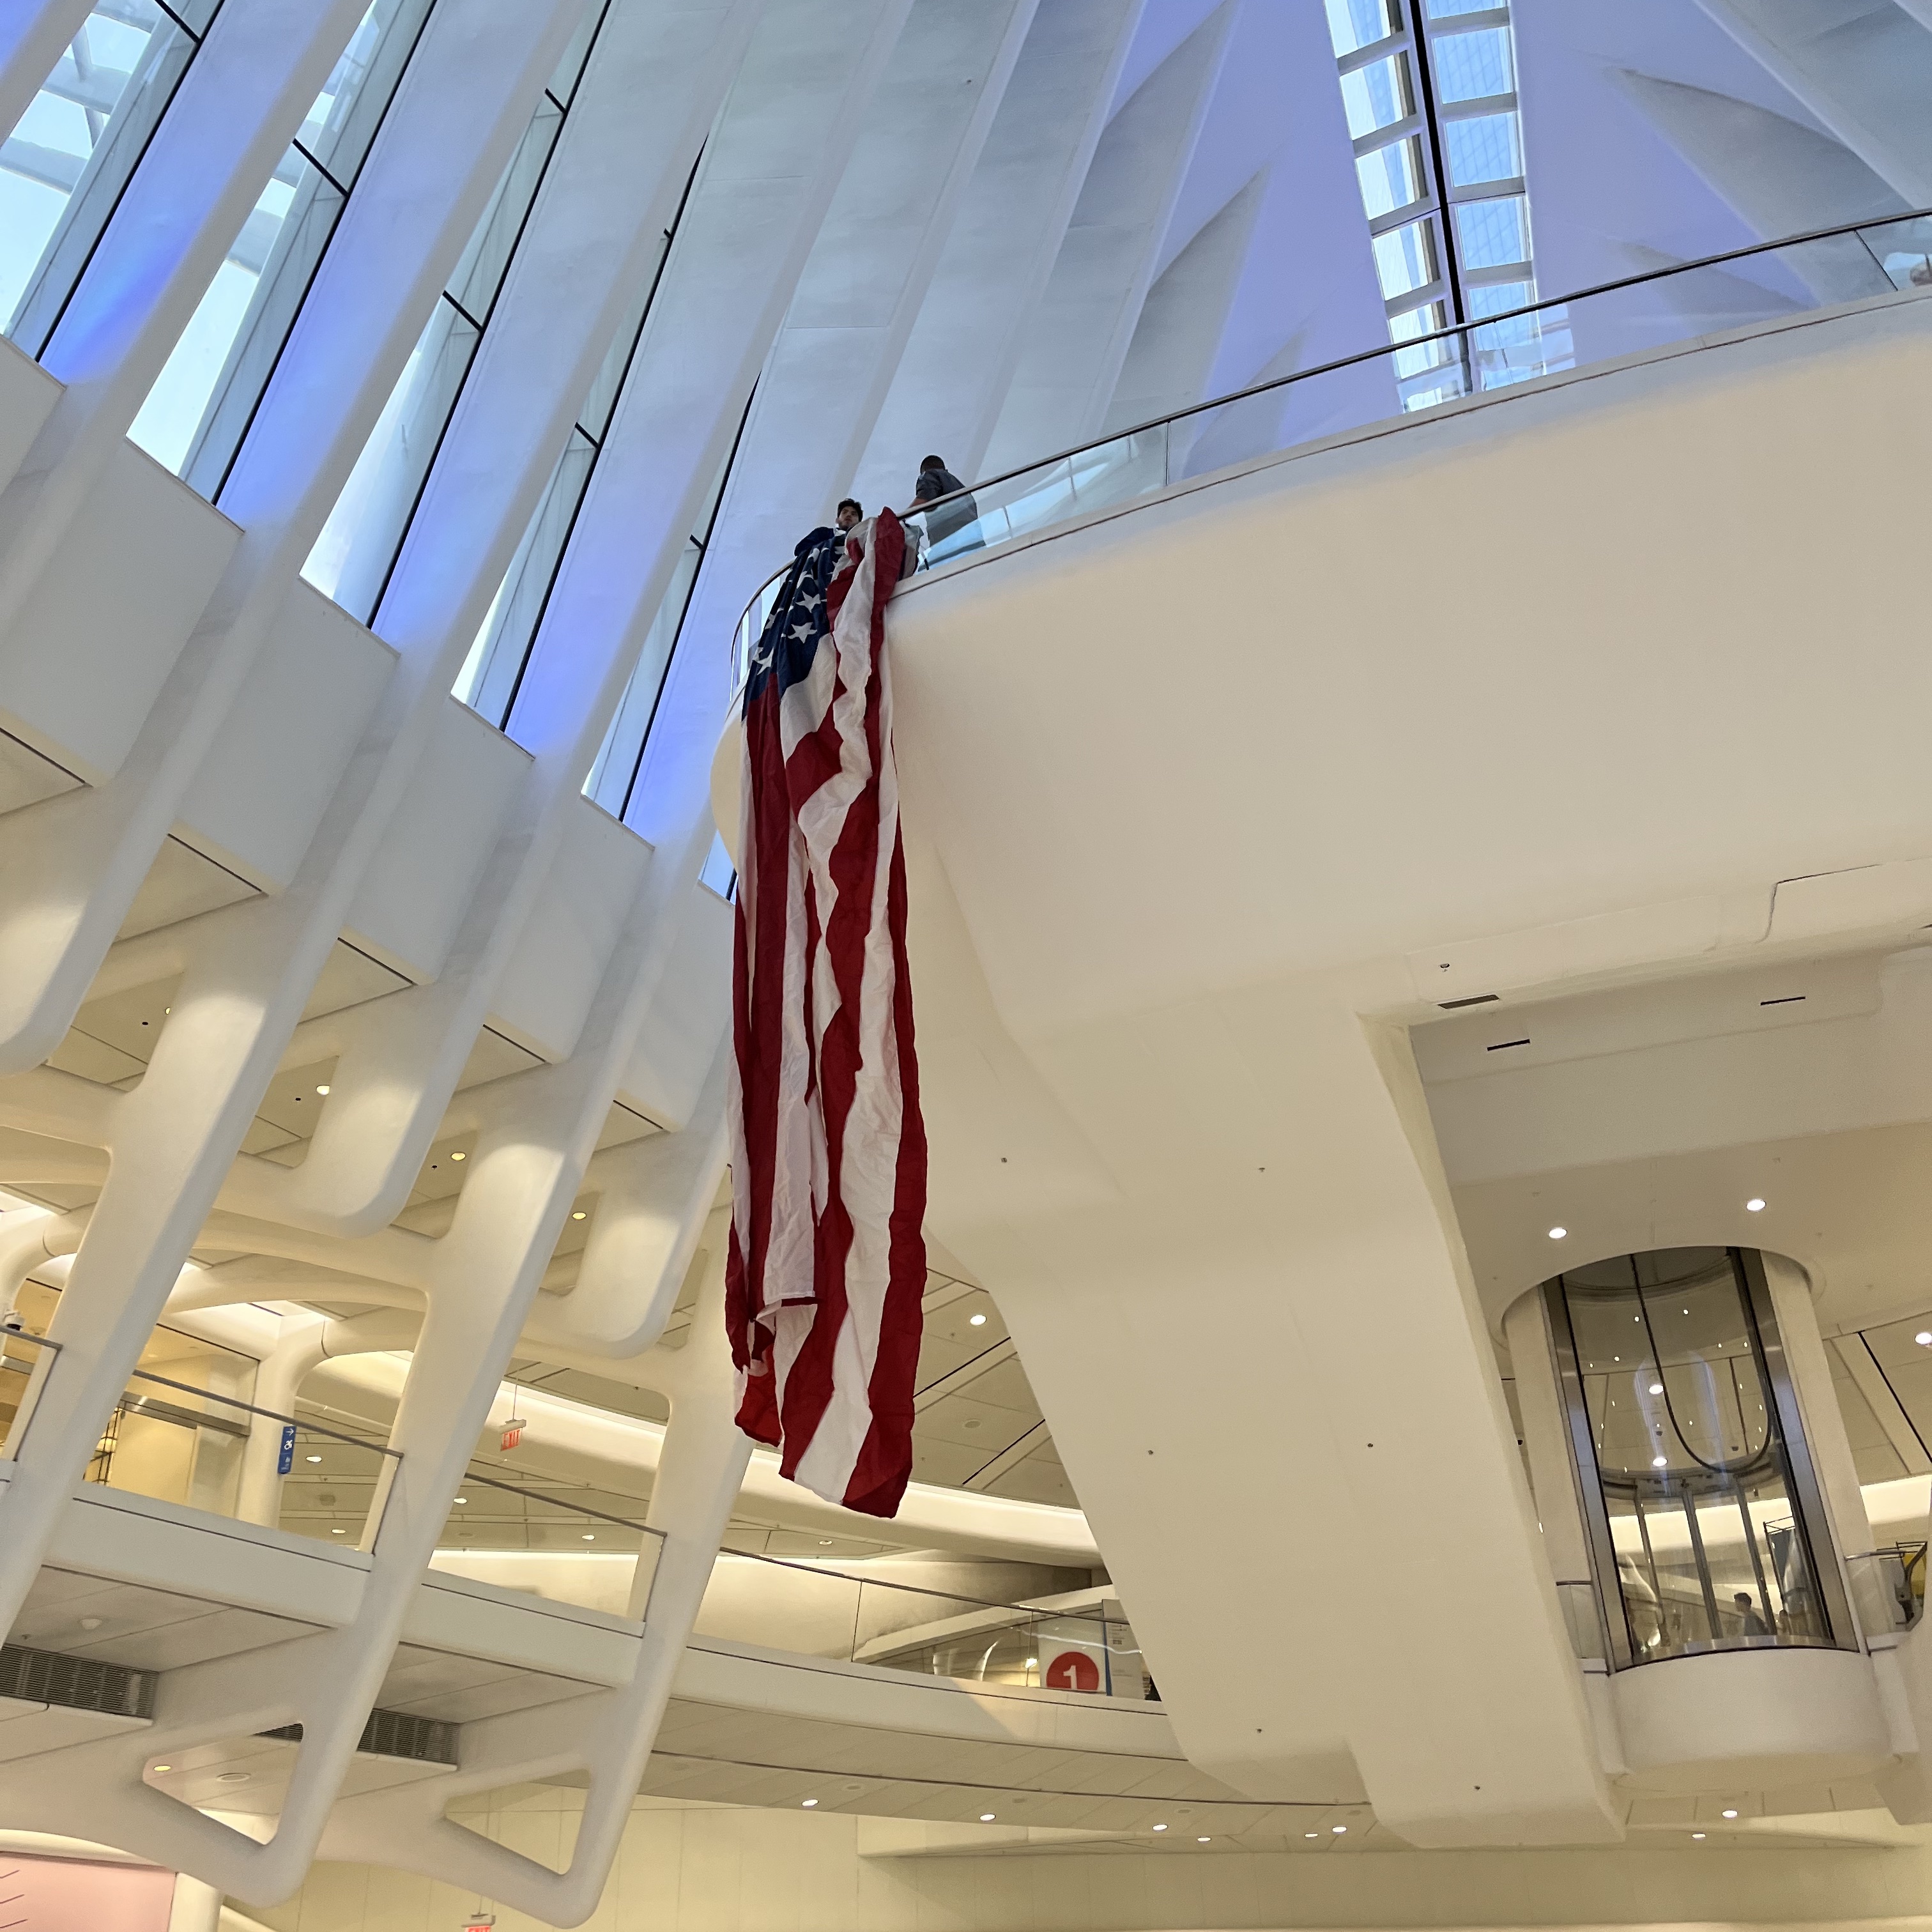 Setting up (or stealing) a large American flag at the Occulus.